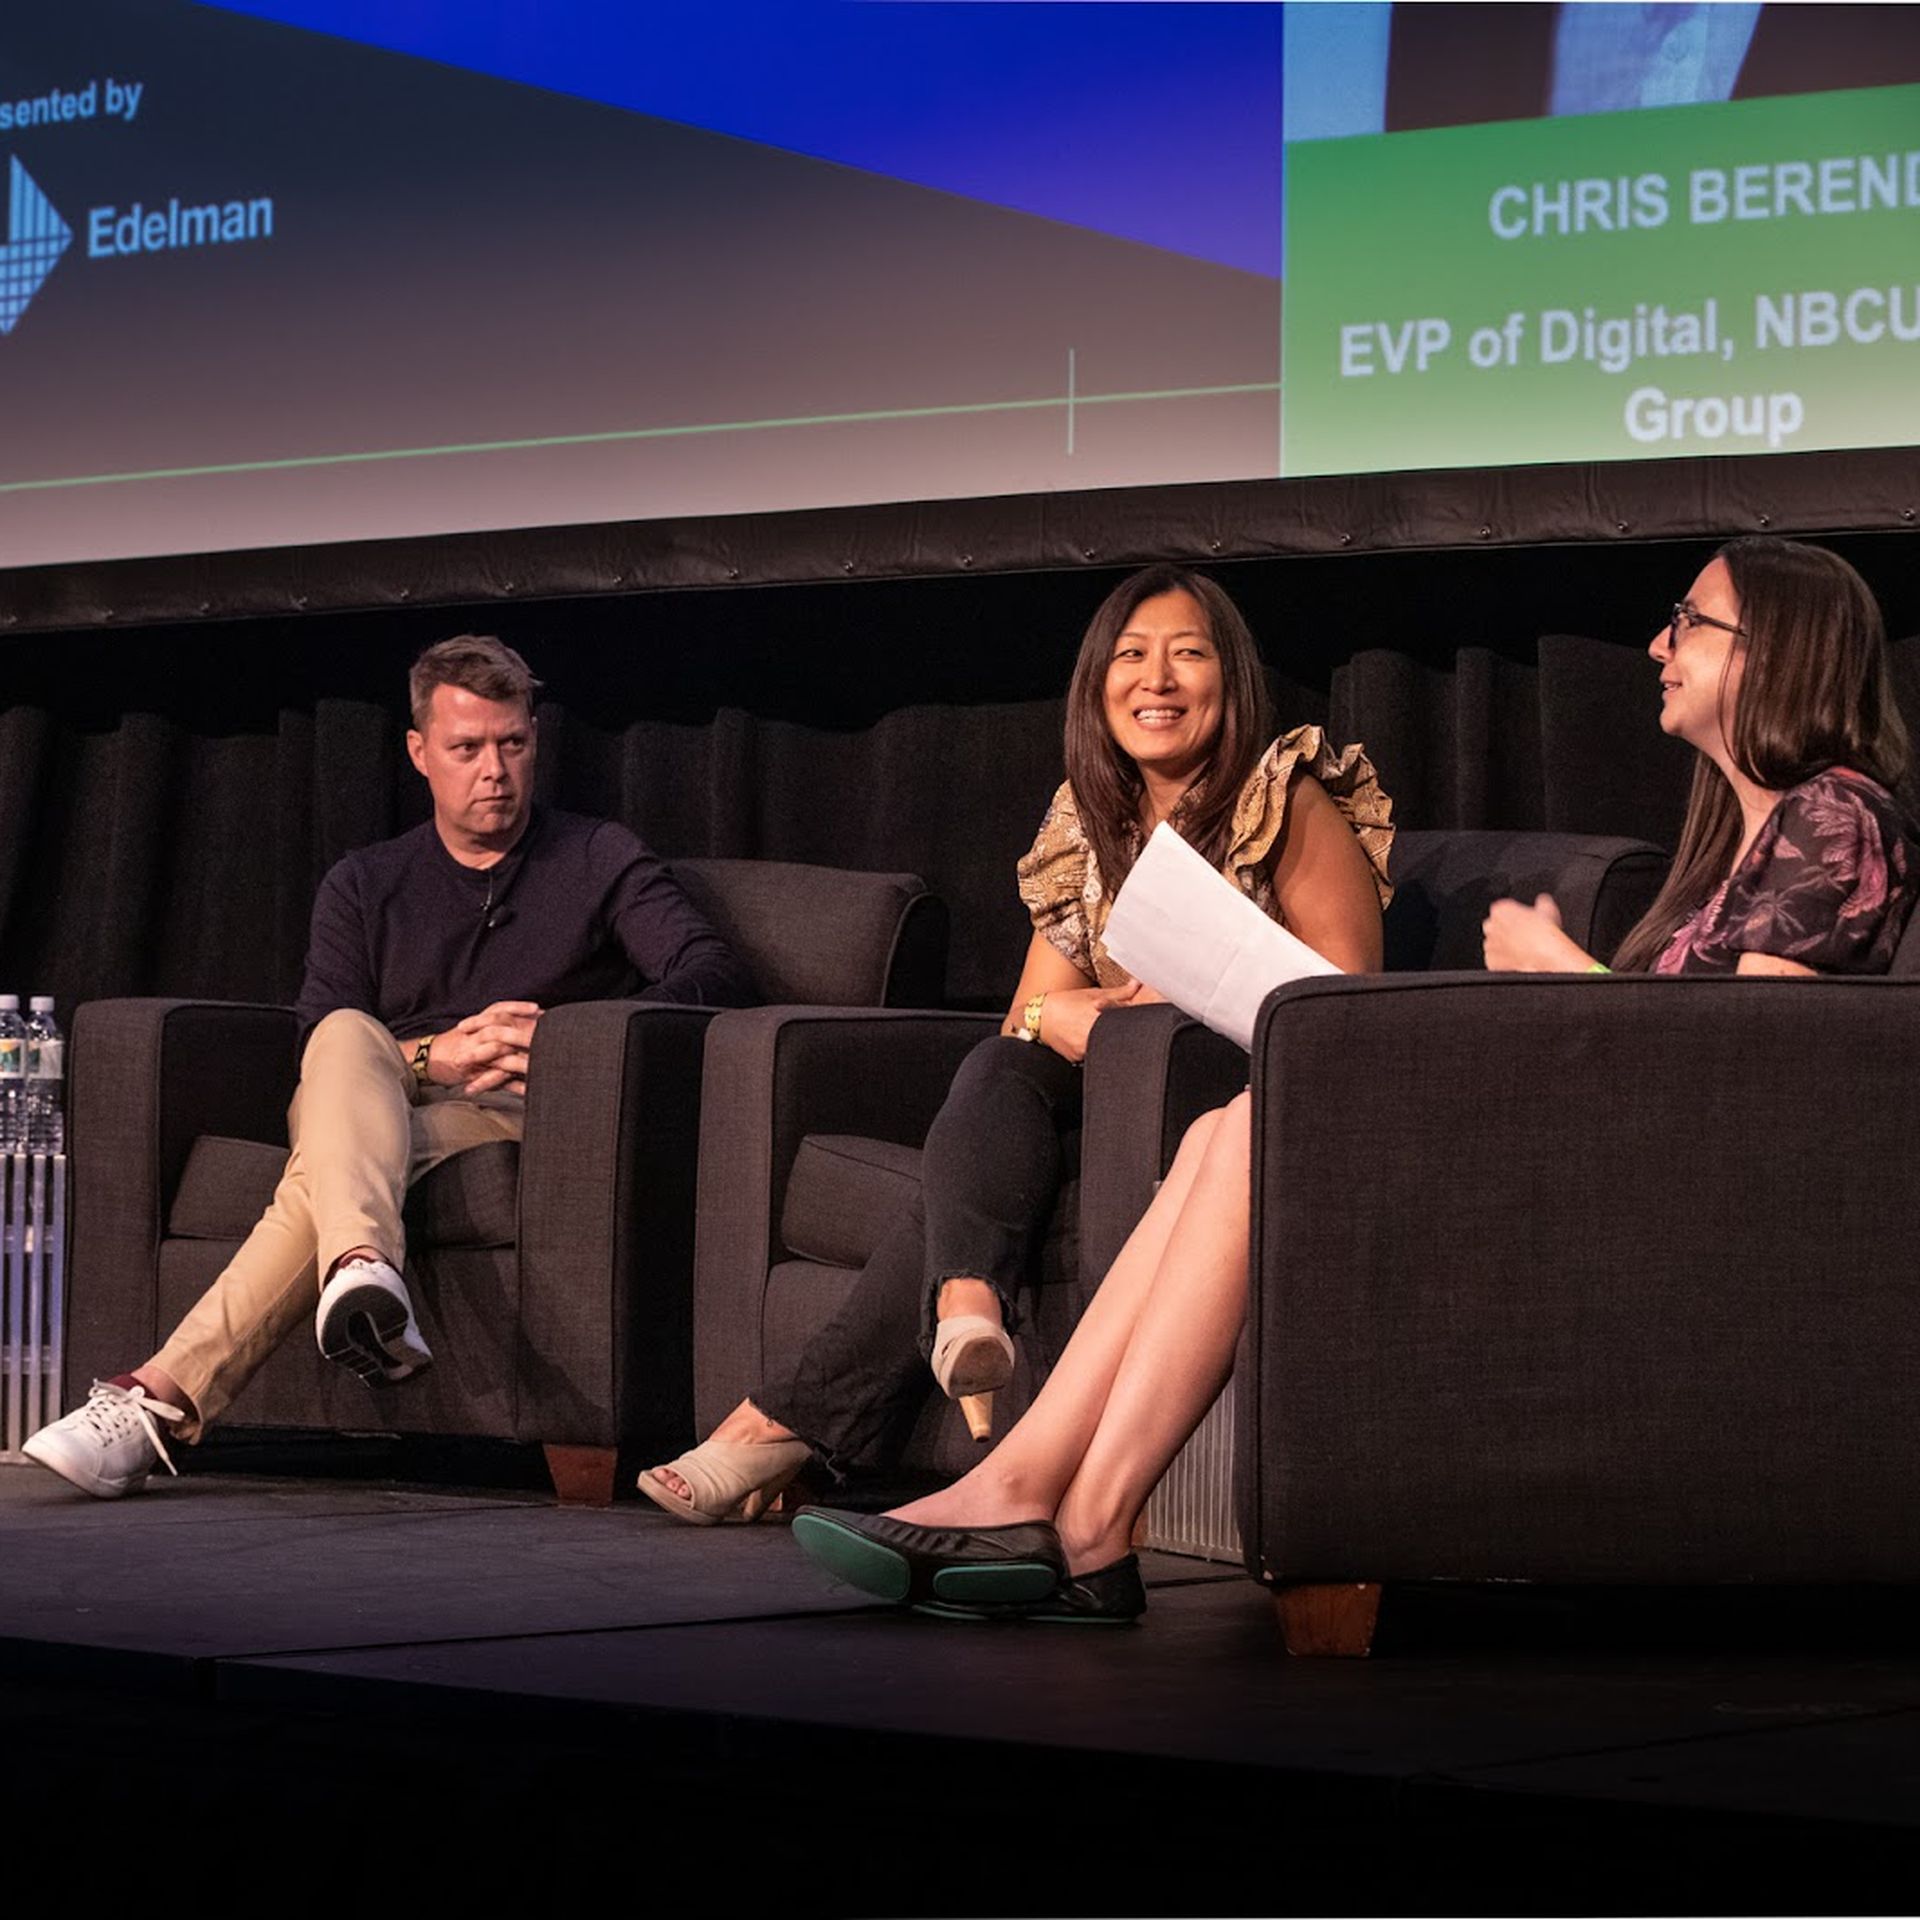 Chris Berend, EVP of Digital for the NBCU News Group; Catherine Kim, SVP of Global Digital News; and Janelle Rodriguez, SVP of NBC News NOW, joined Axios’ Kerry Flynnat VidCon 2022.